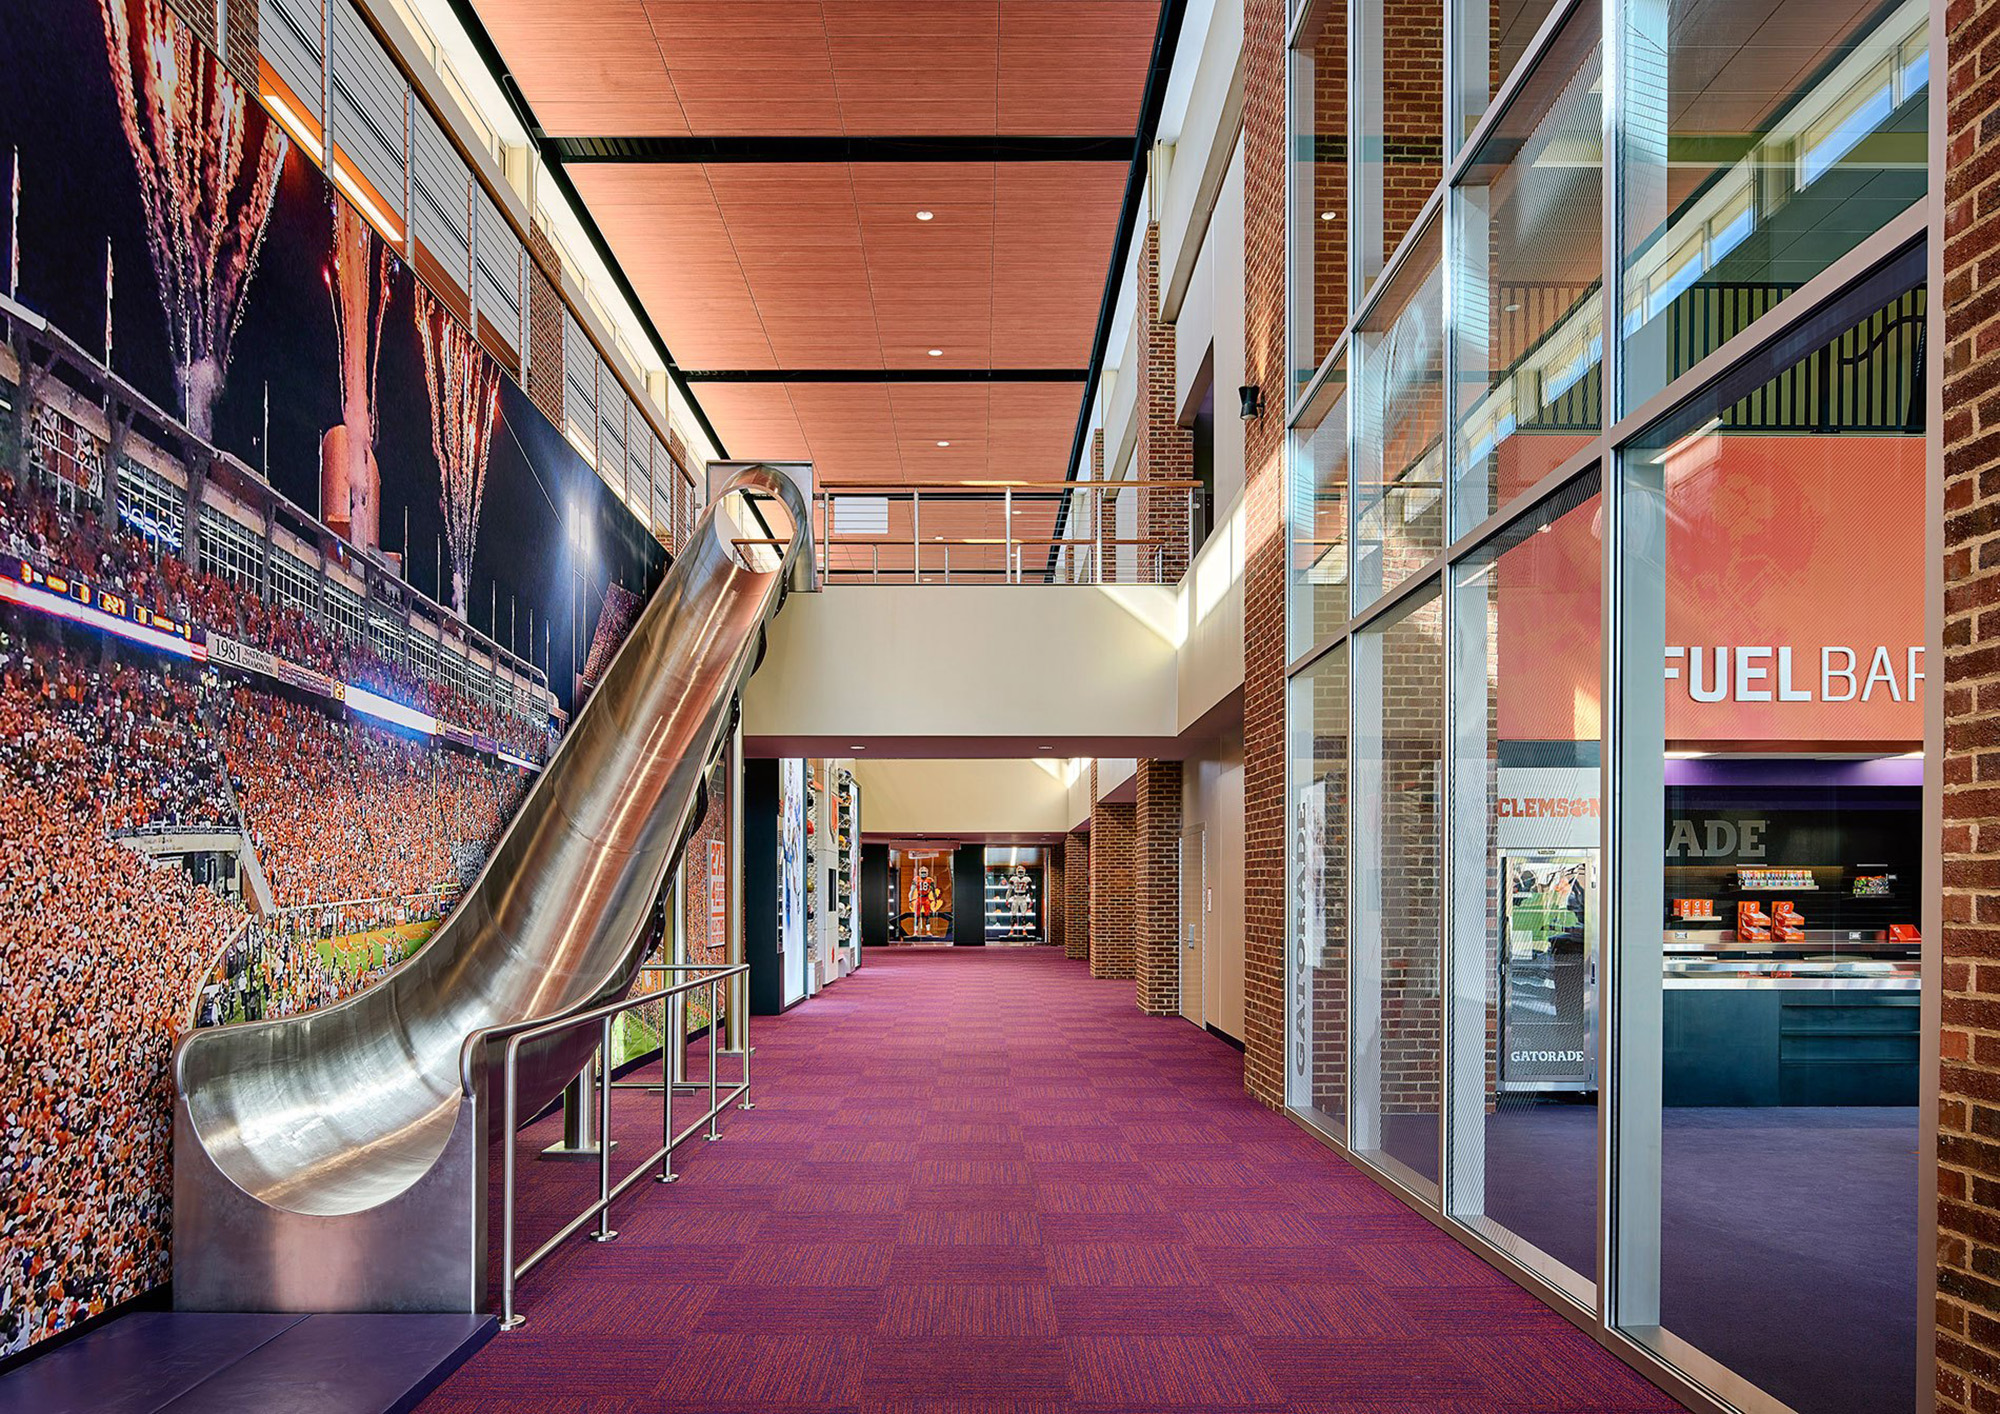 A slide connects the lobby to the concourse at Clemson University’s Alan N. Reeves Football Operations Complex in Clemson, South Carolina